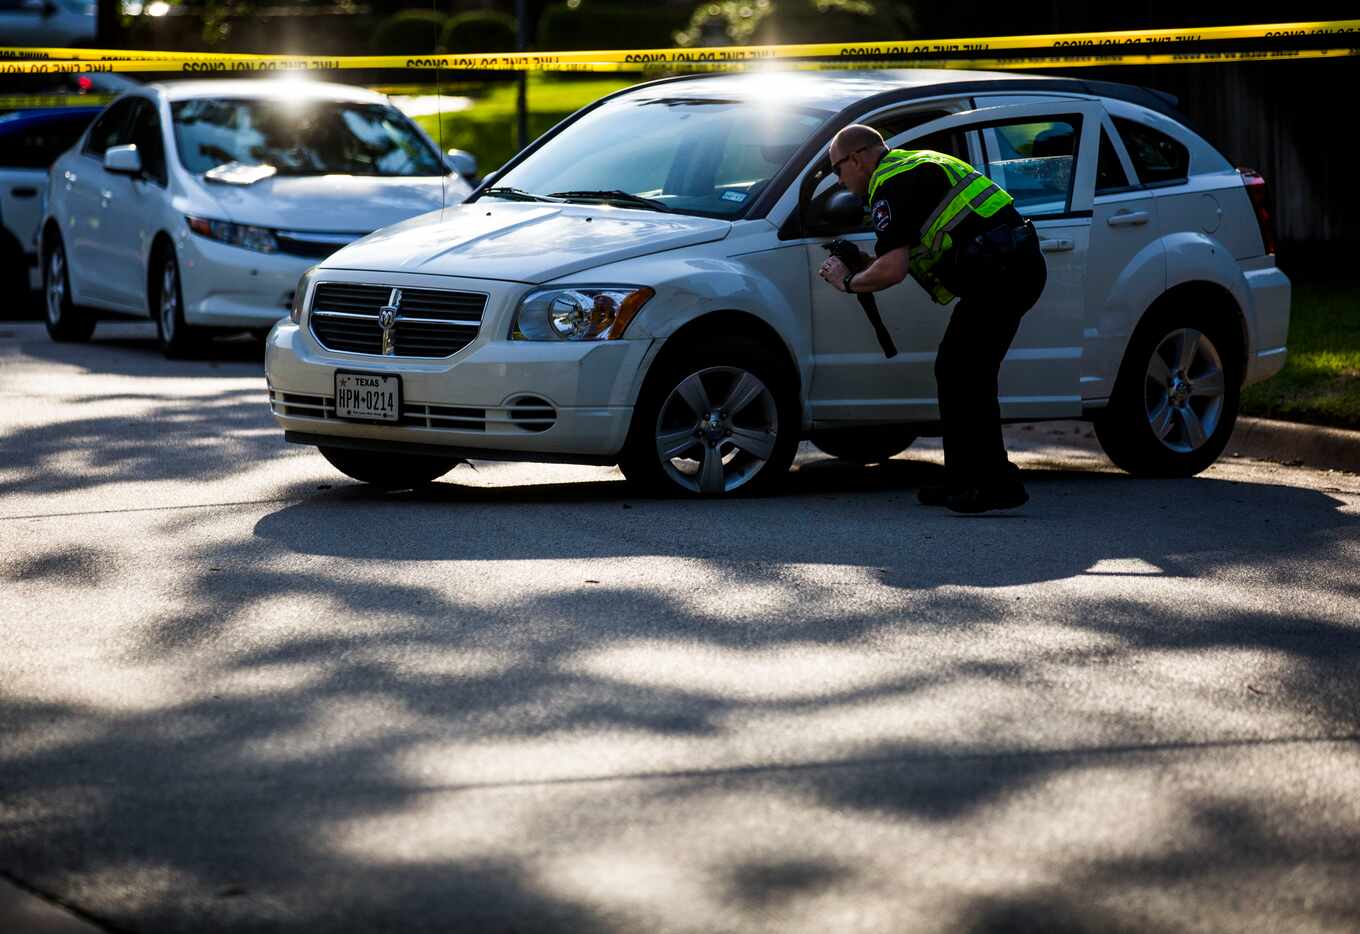 A police investigator photographs a vehicle that was carjacked, at the scene of an...